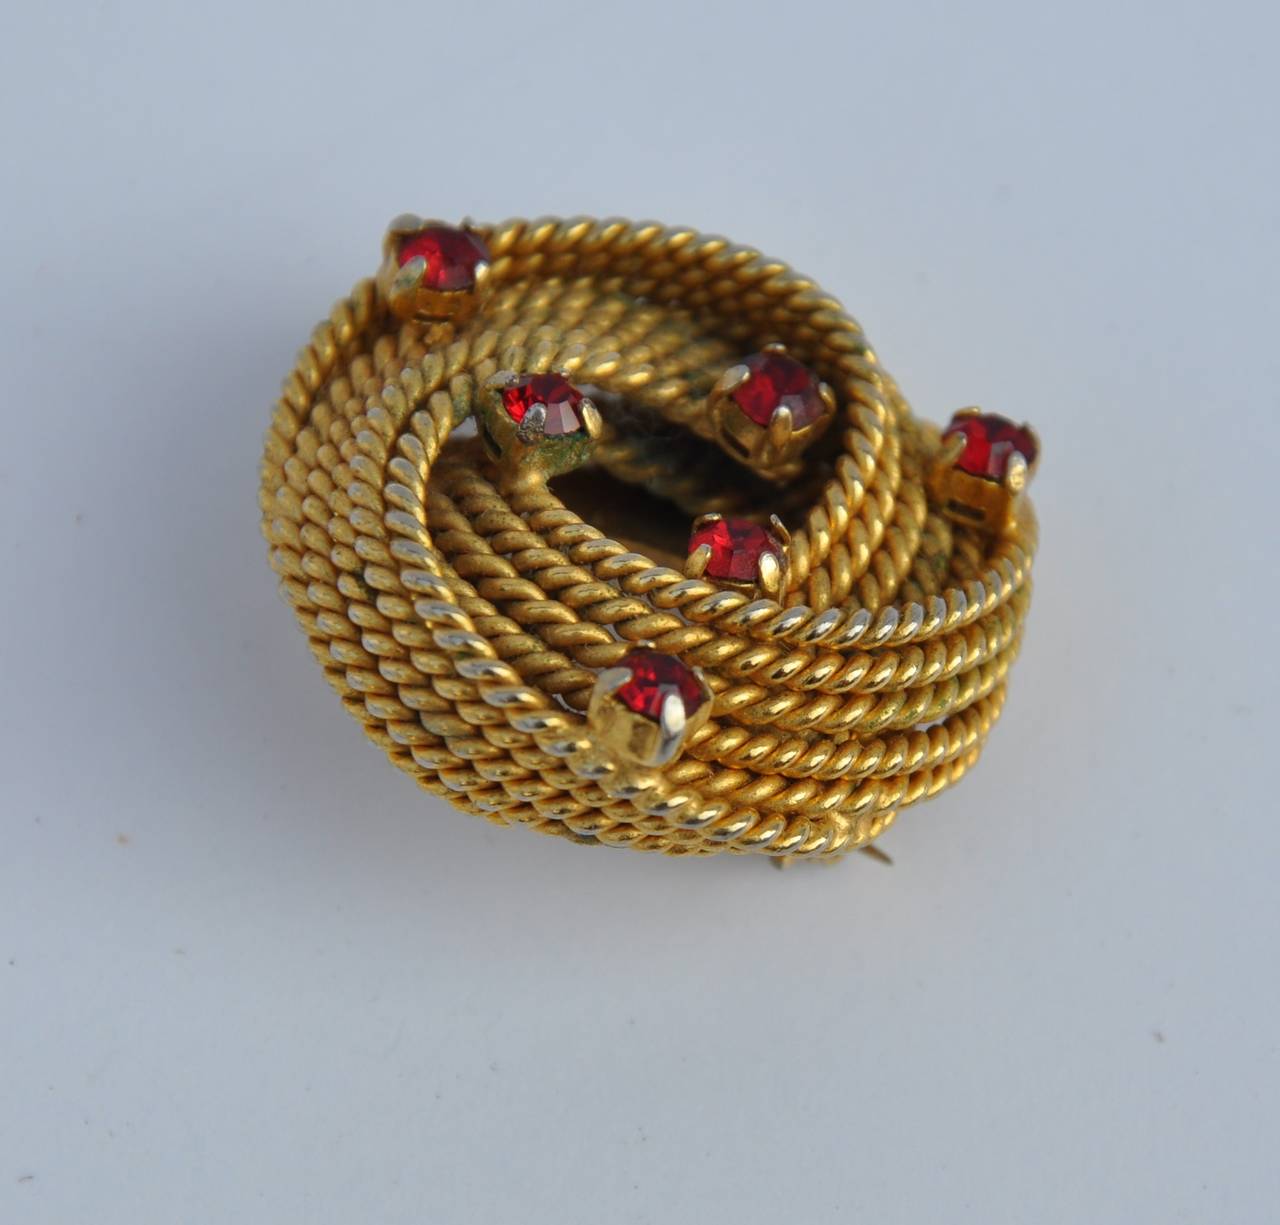 "Twisted Rope" gilded gold hardware brooch is accented with specks of "rubies" rhinestone and measures 1 5/12" in height, 1 1/4" in width and 1/2" in depth.